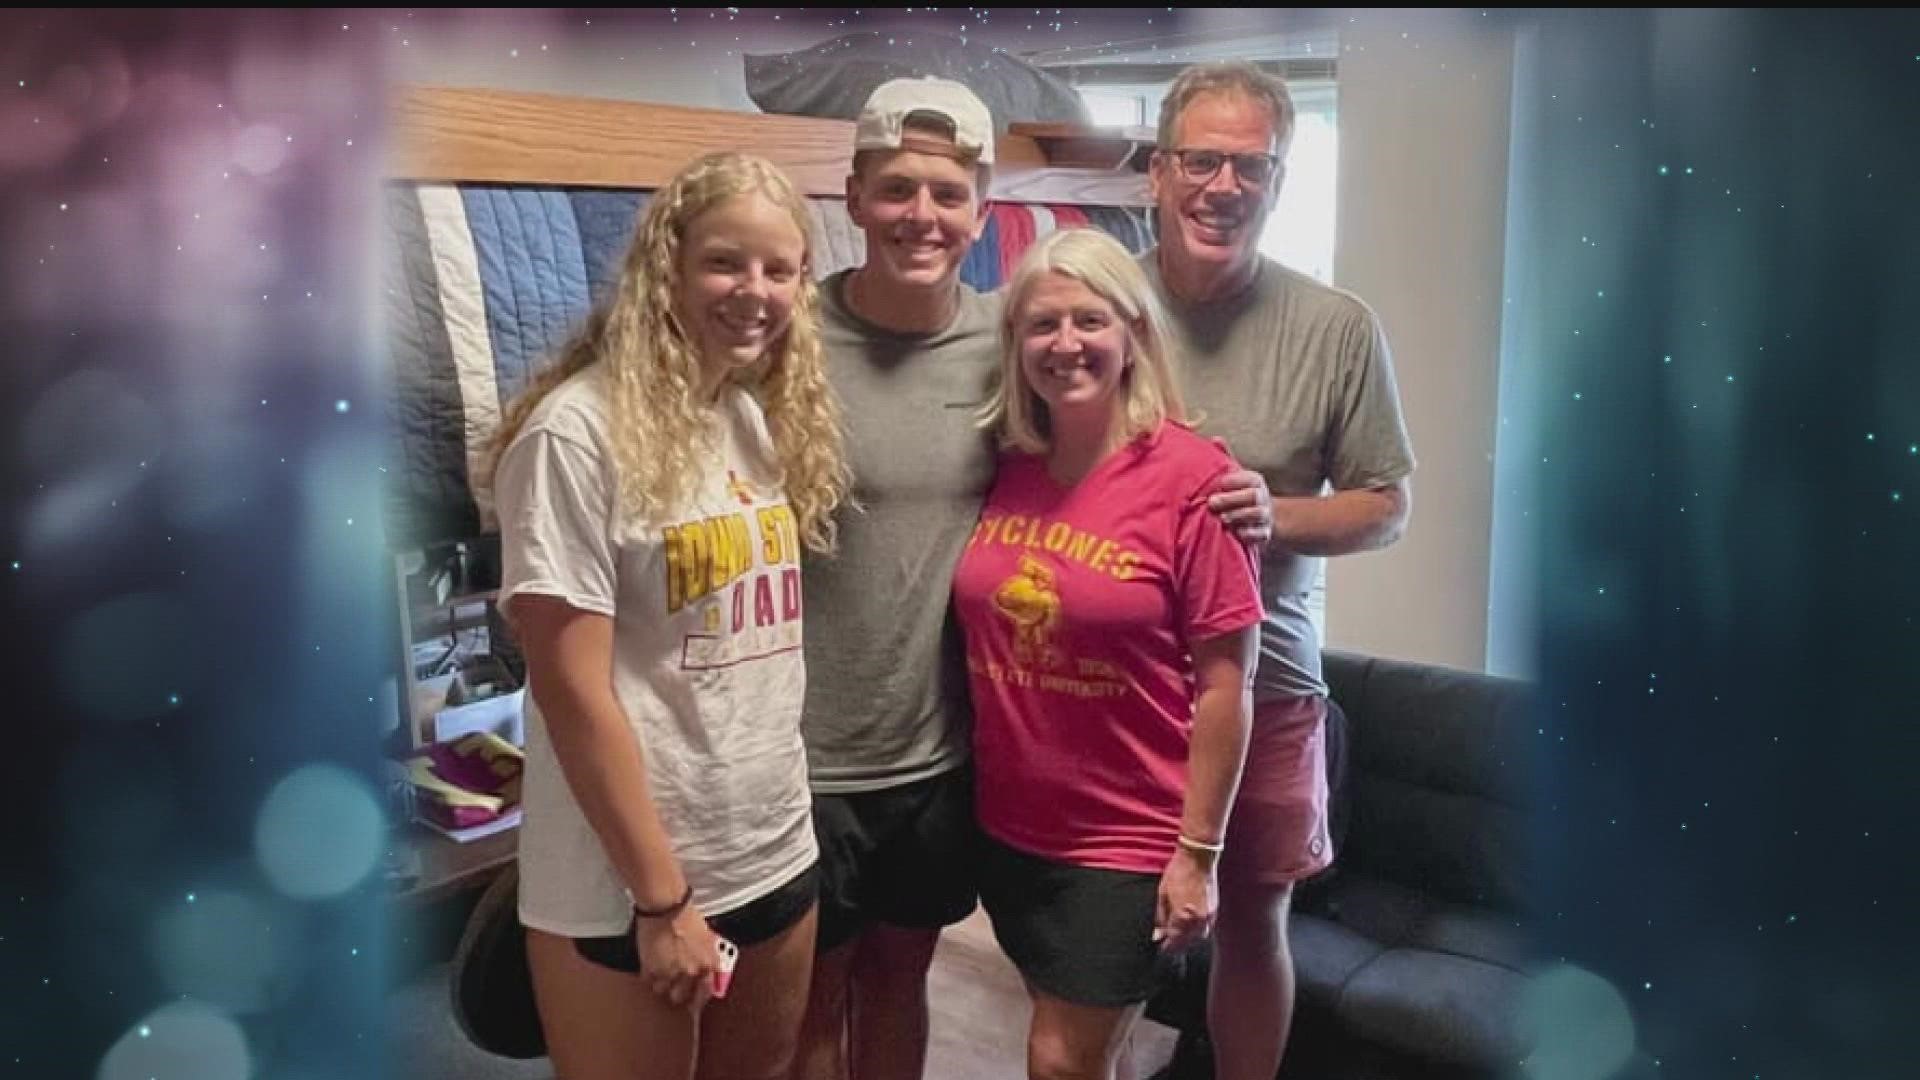 As families across the country begin dropping their children off at college, KARE 11 viewers shared their own unique, bittersweet stories with BTN’s Jana Shortal.